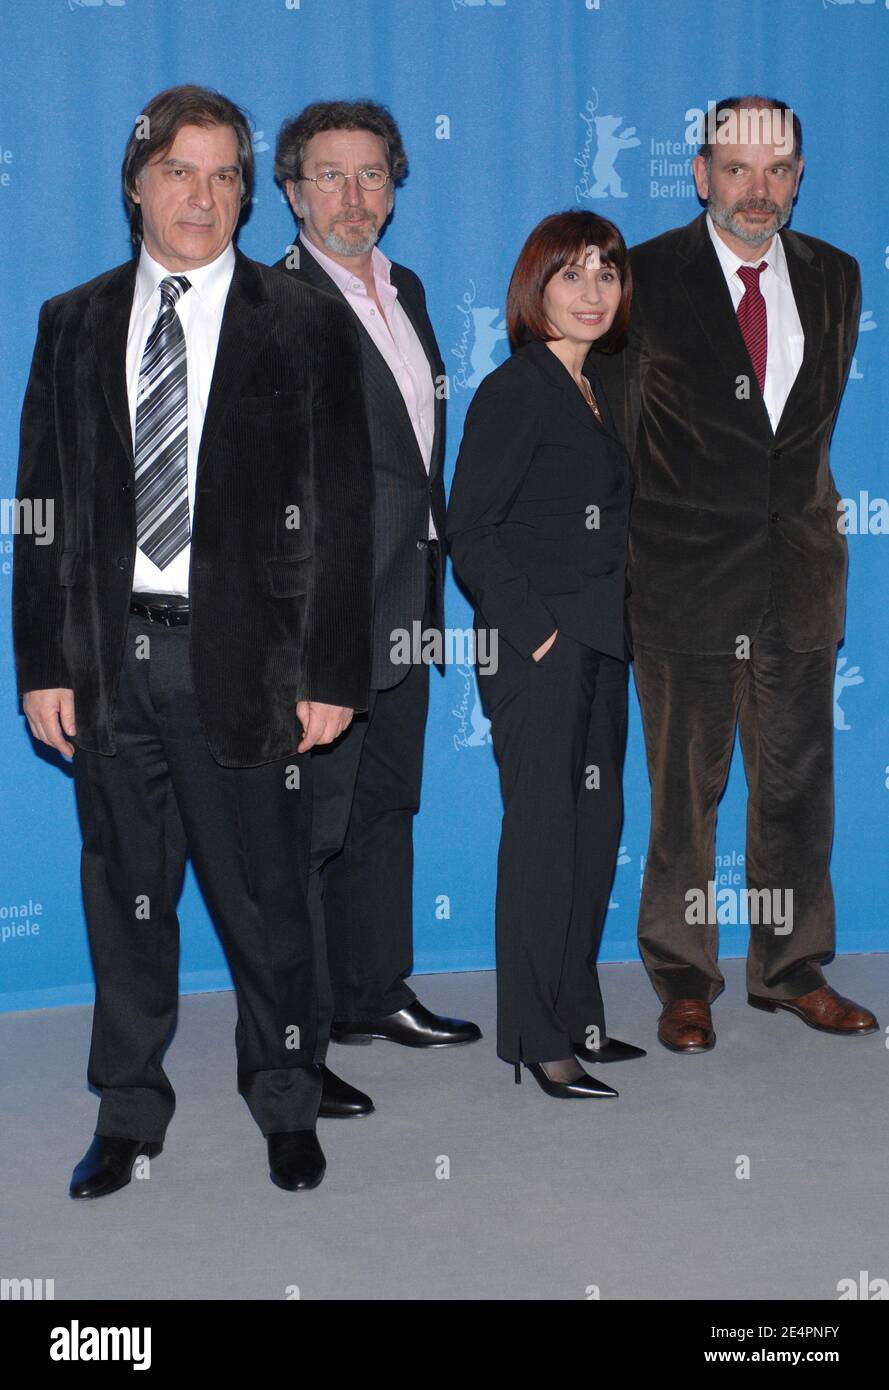 Director Robert Guediguian and cast members Ariane Ascaride, Gerard Meylan and Jean-Pierre Darroussin pose for pictures during the 'Lady Jane' photocall at the 58th annual Berlin Film Festival in Berlin, Germany, on February 13, 2008. Photo by Nicolas Khayat/ABACAPRESS.COM Stock Photo